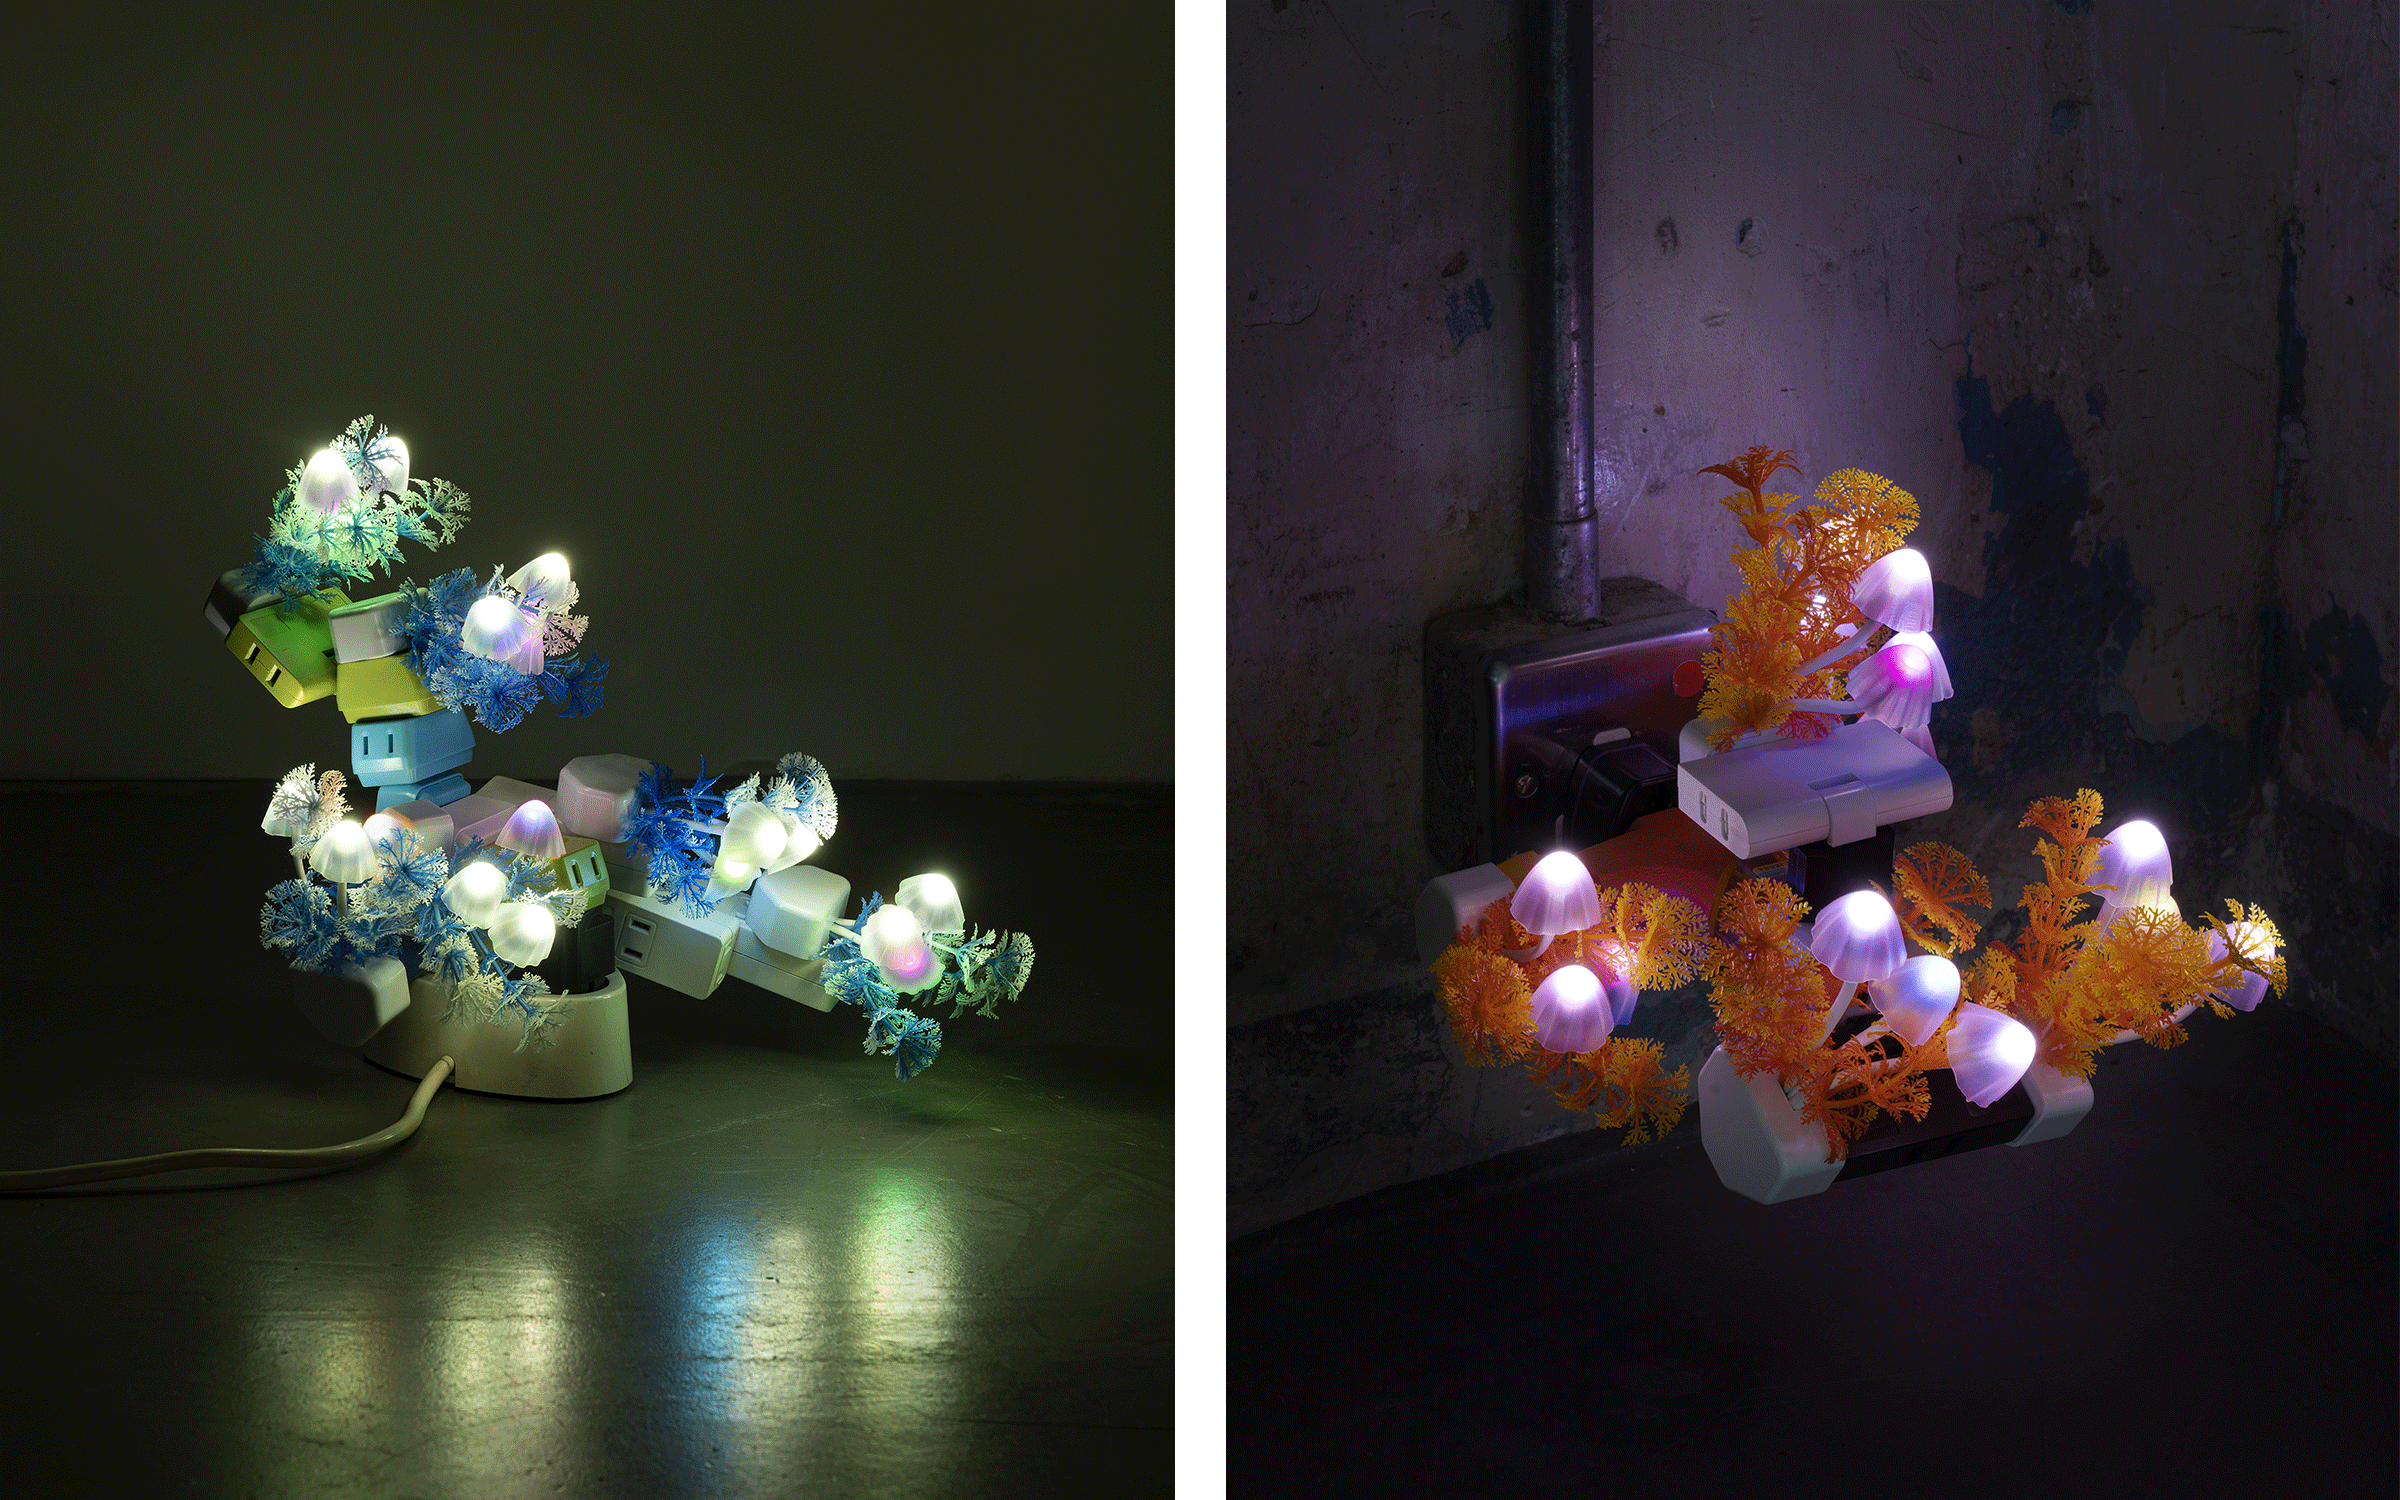 Left: Trevor Yeung, Night Mushroom in shade (table), 2022. Courtesy of the artist and Blindspot Gallery. Right: Trevor Yeung, Night Mushroom Colon (Five), 2022. Courtesy of the artist and Blindspot Gallery 